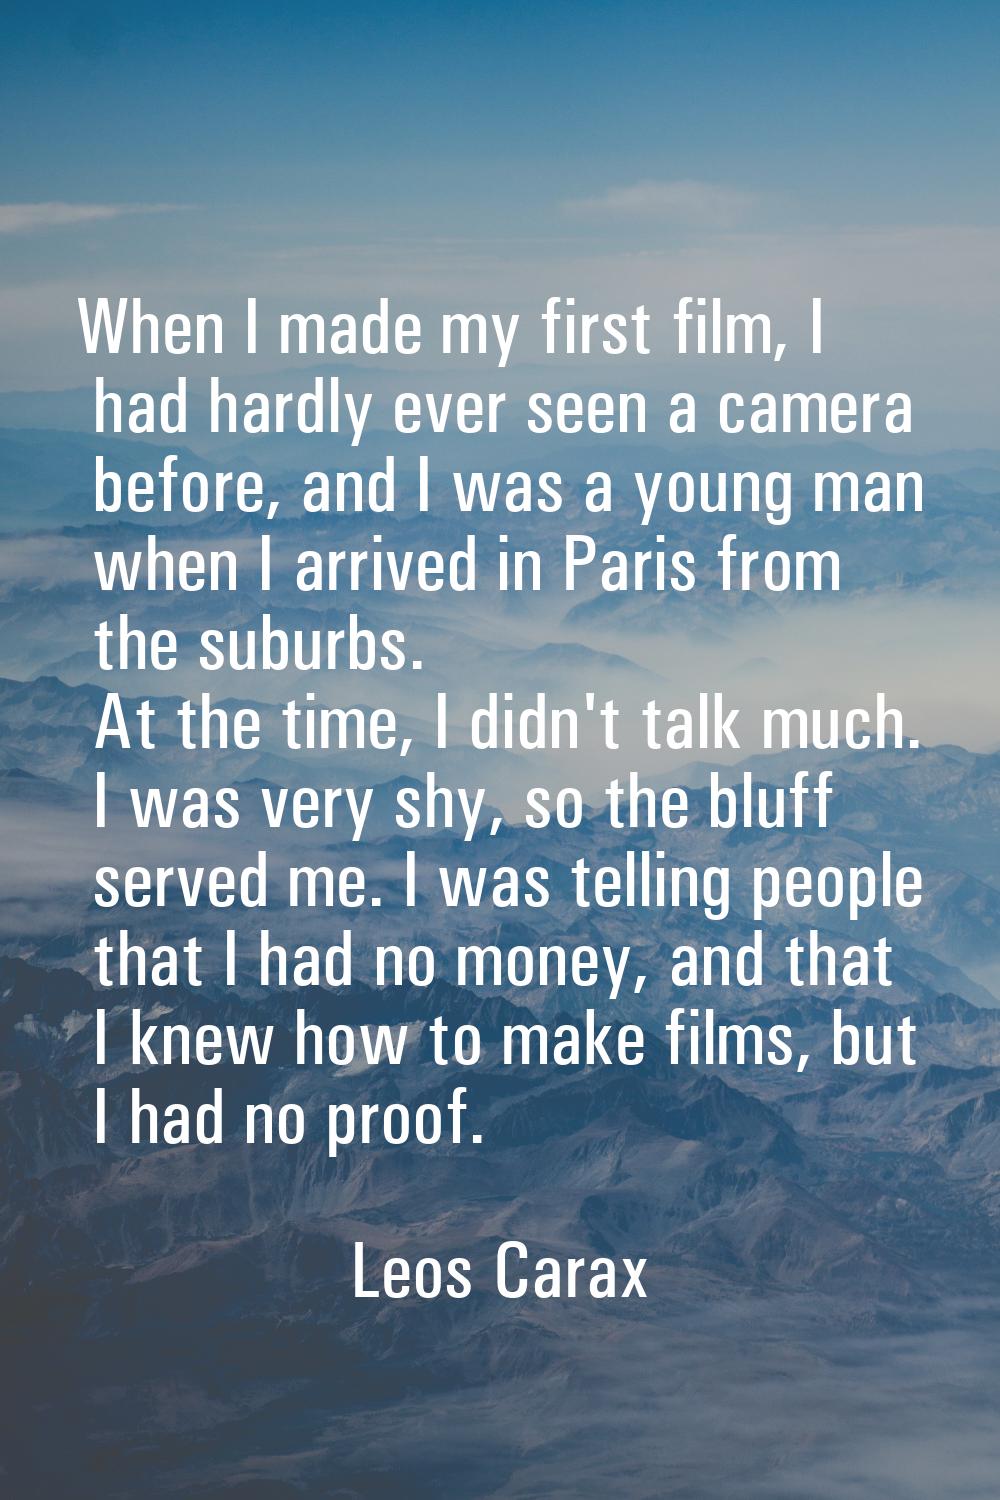 When I made my first film, I had hardly ever seen a camera before, and I was a young man when I arr